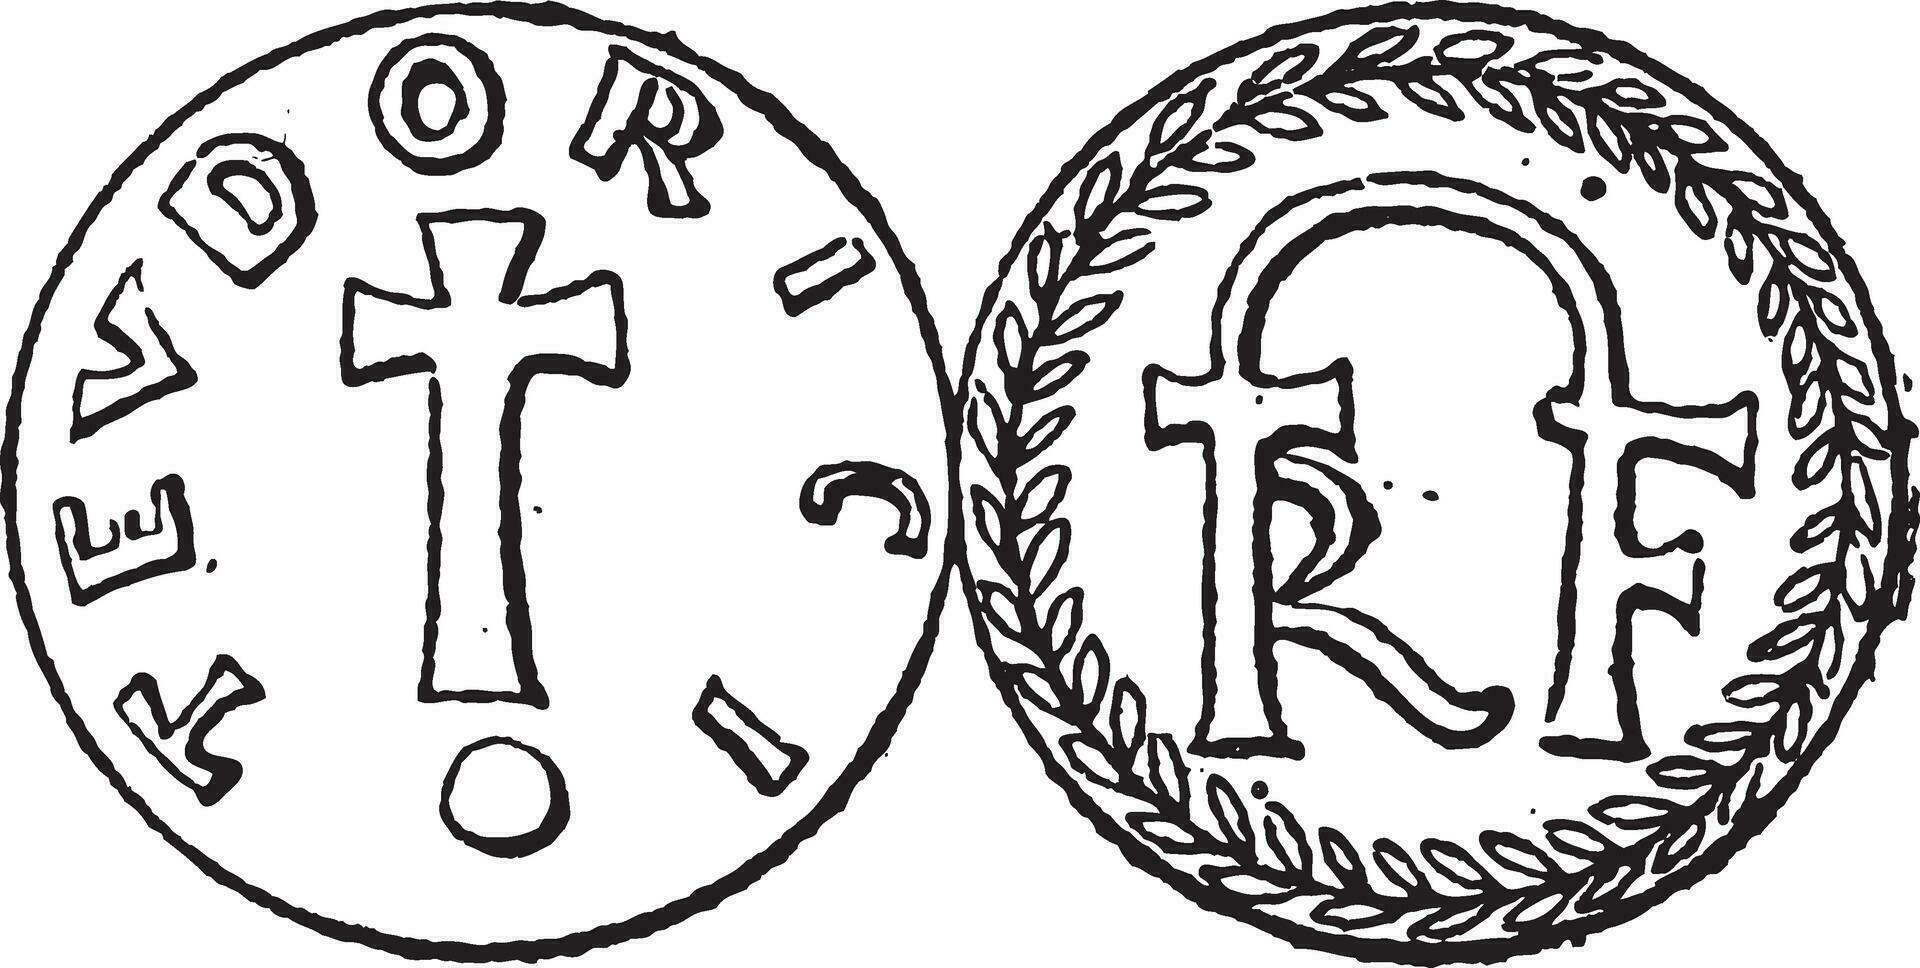 Coin Currency, Merovingian Dynasty, vintage engraving vector